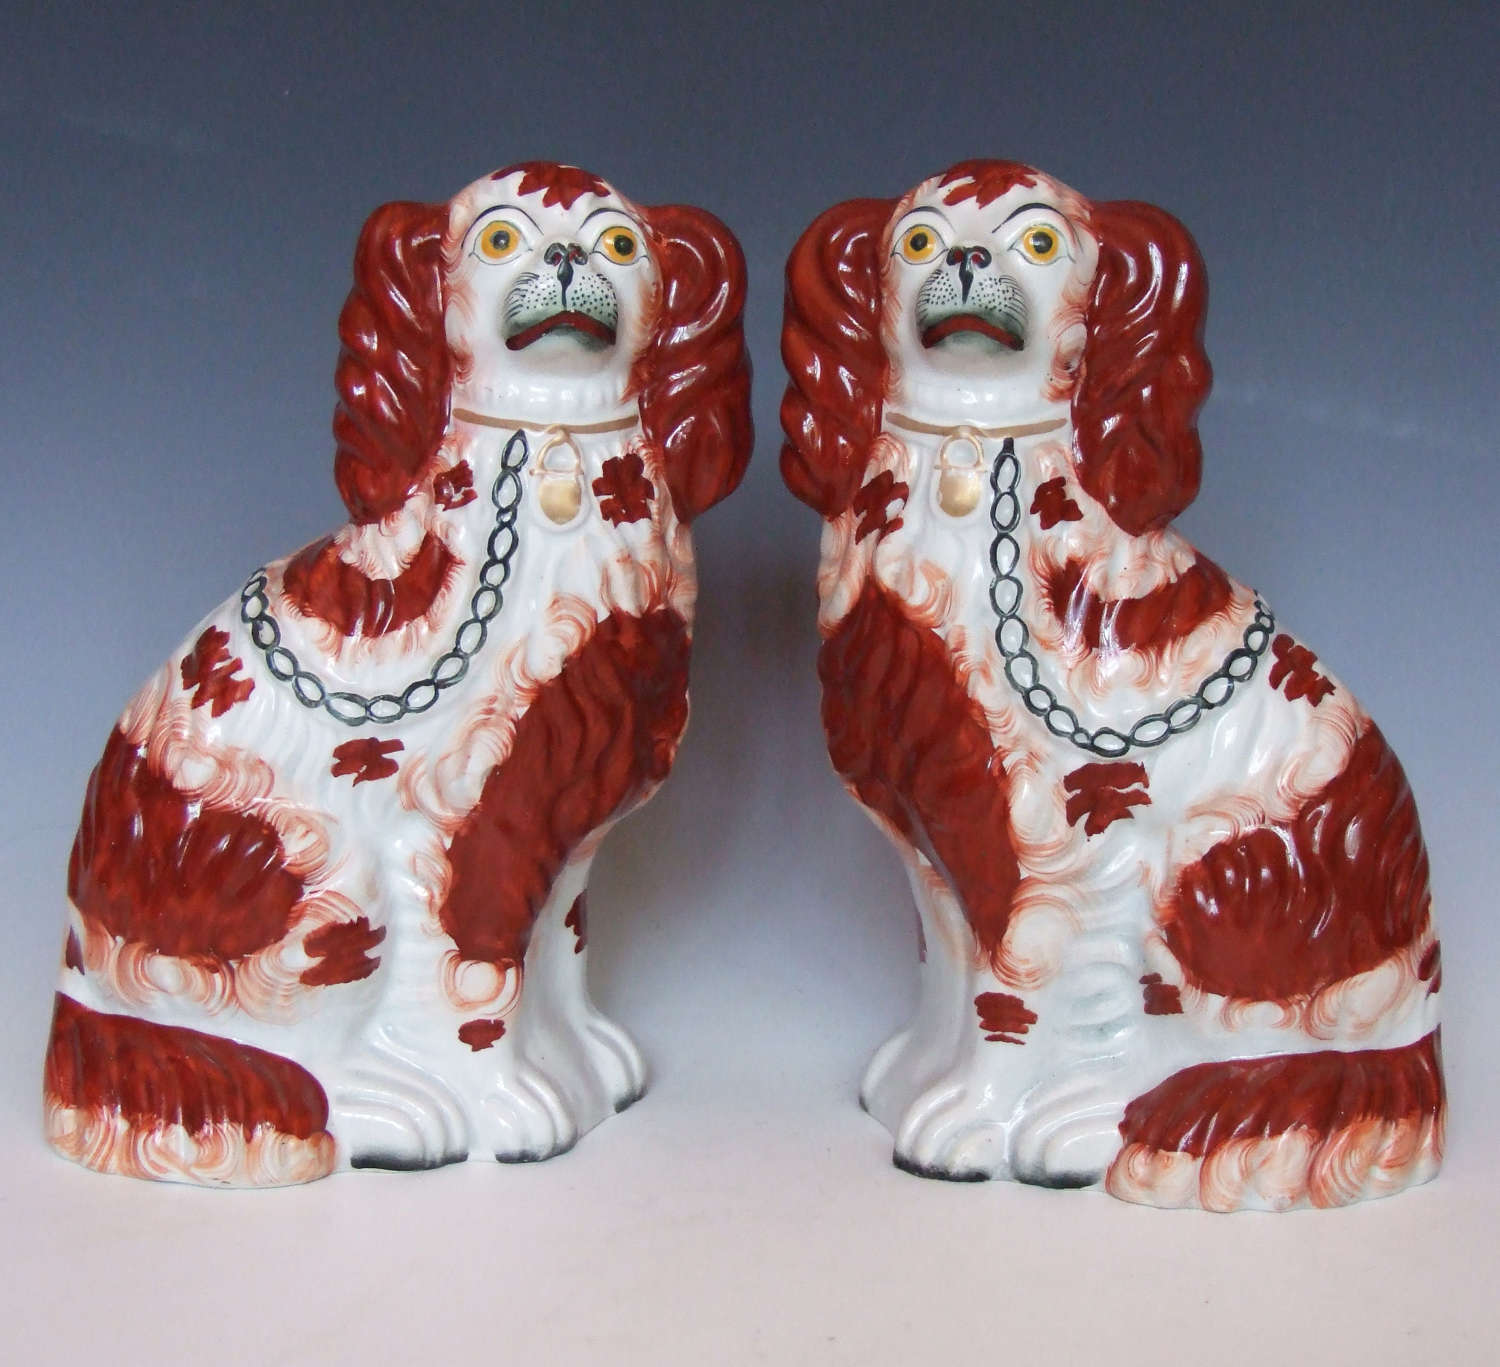 Fine pair of red and white Staffordshire spaniel figures.